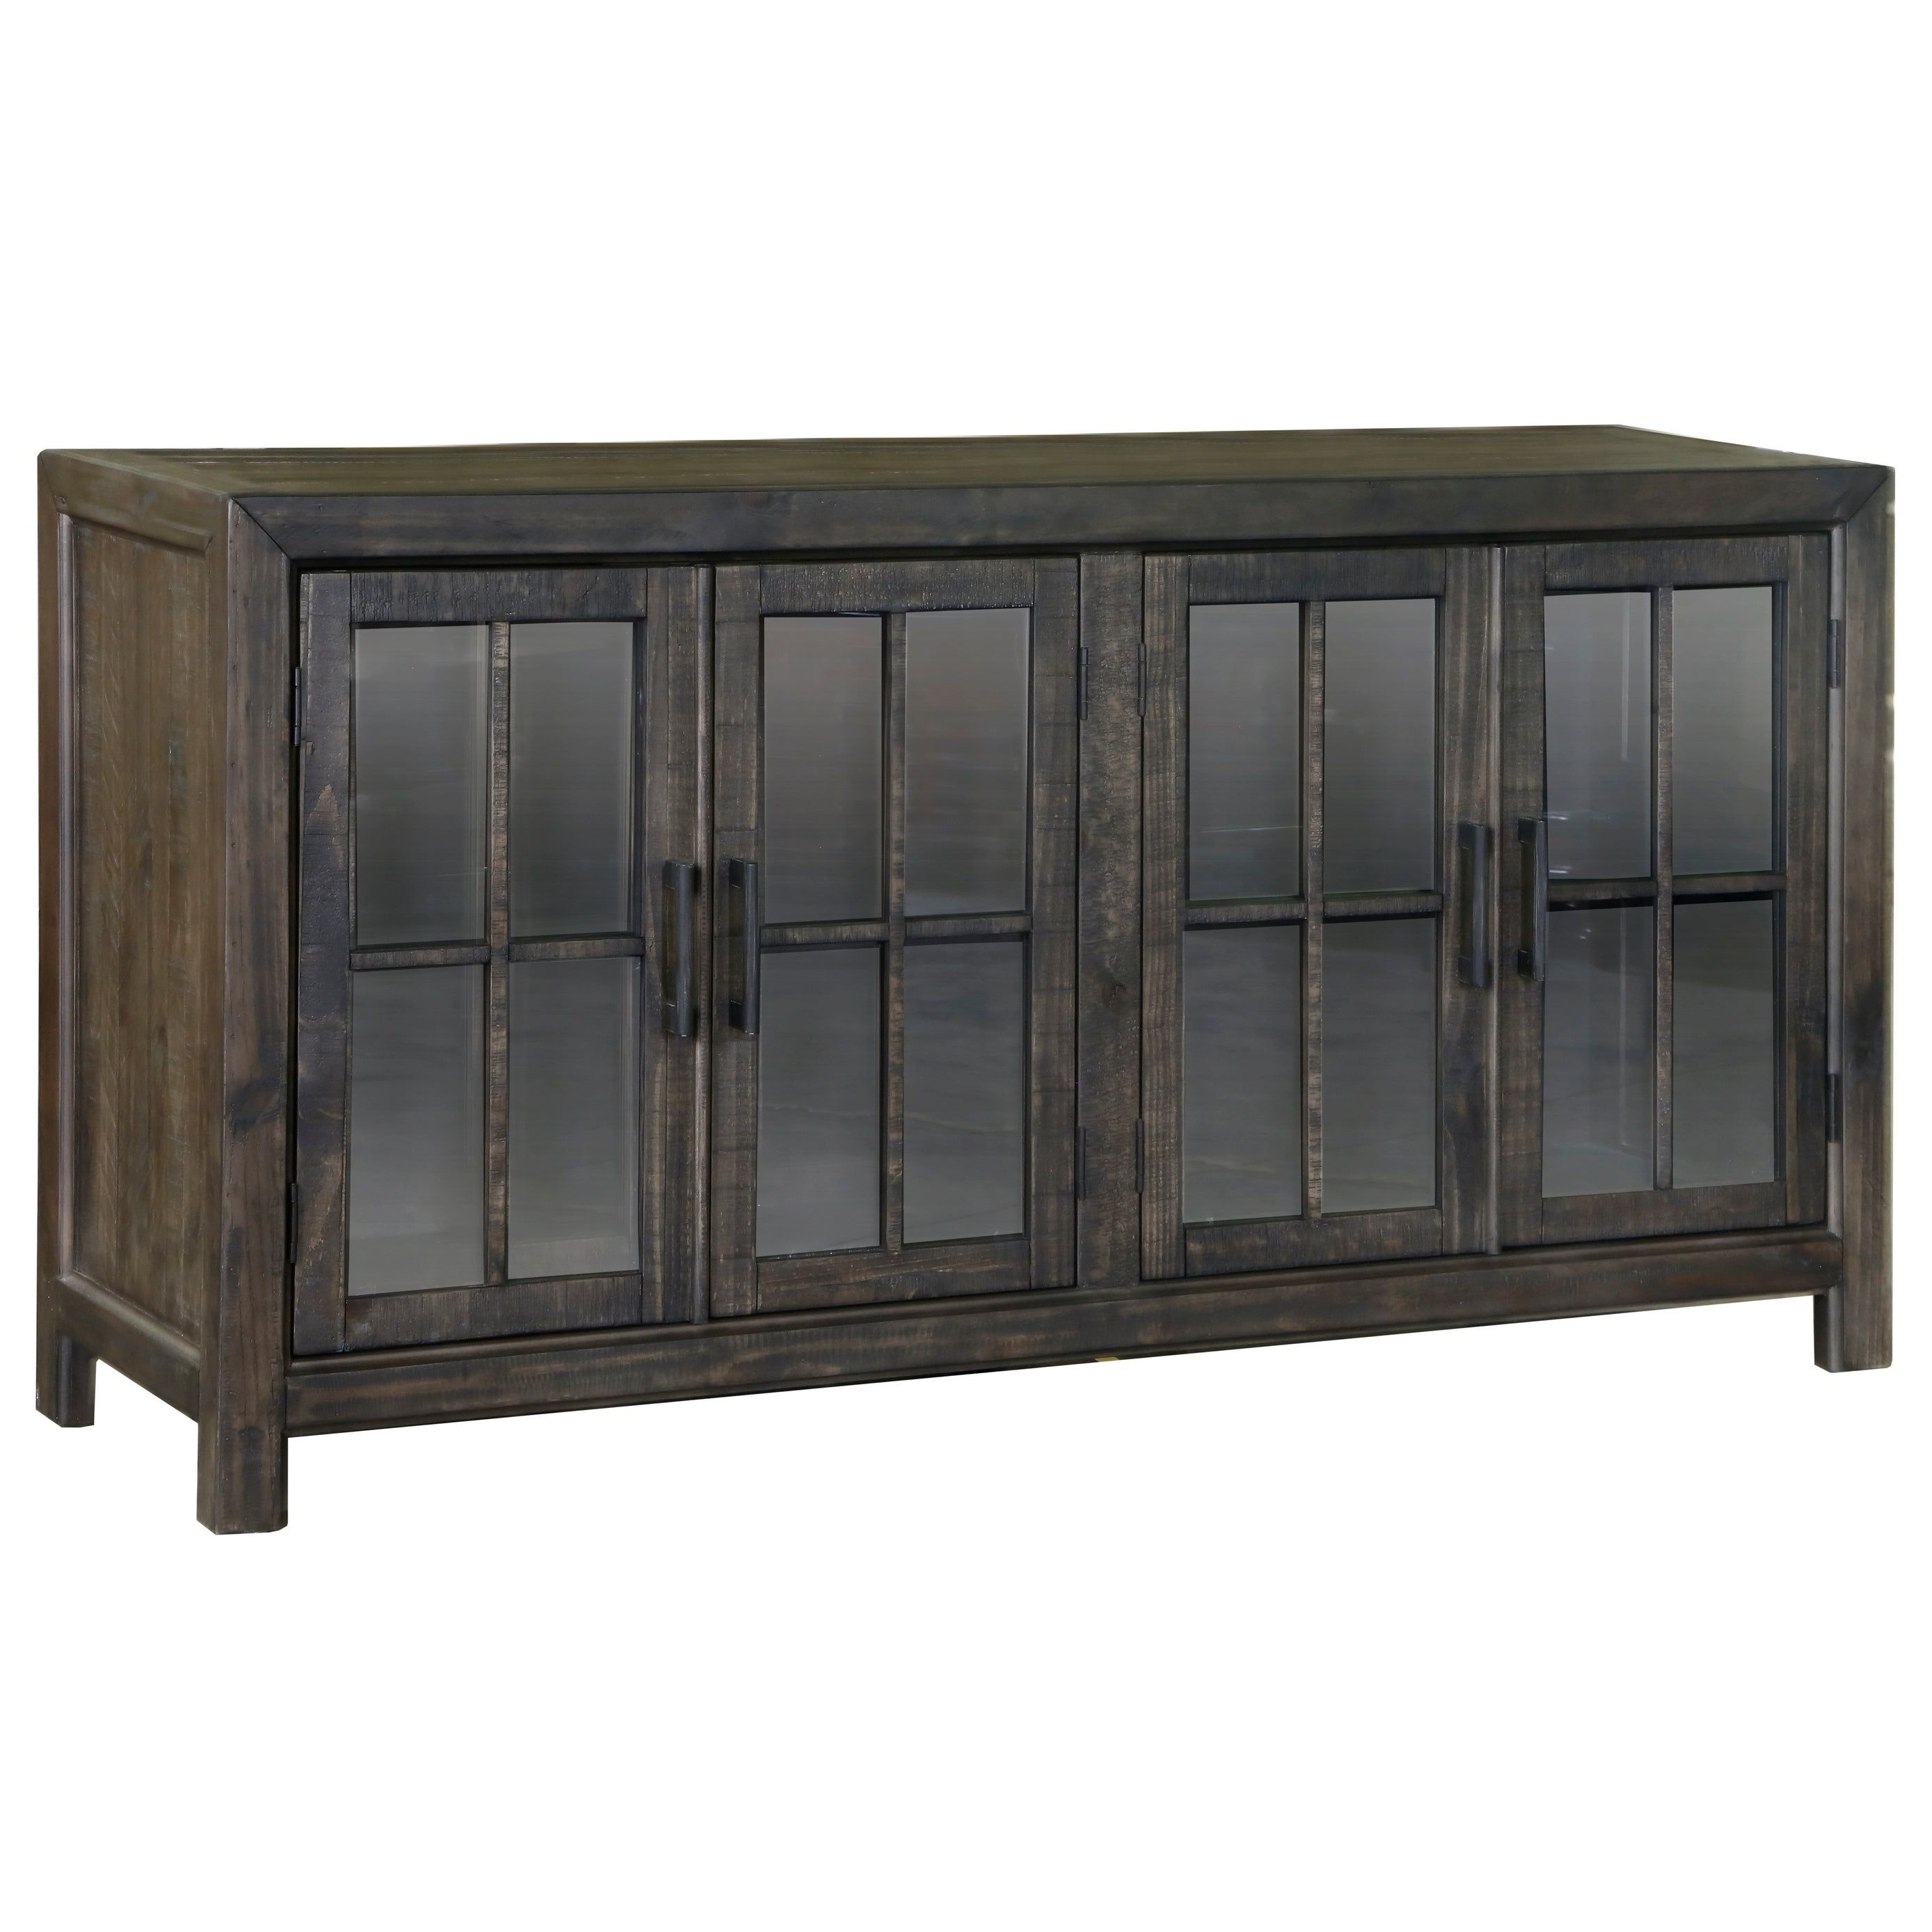 Bellamy Traditional Peppercorn Wood Buffet Curio Pertaining To Espresso Wood Multi Use Buffets (View 11 of 20)